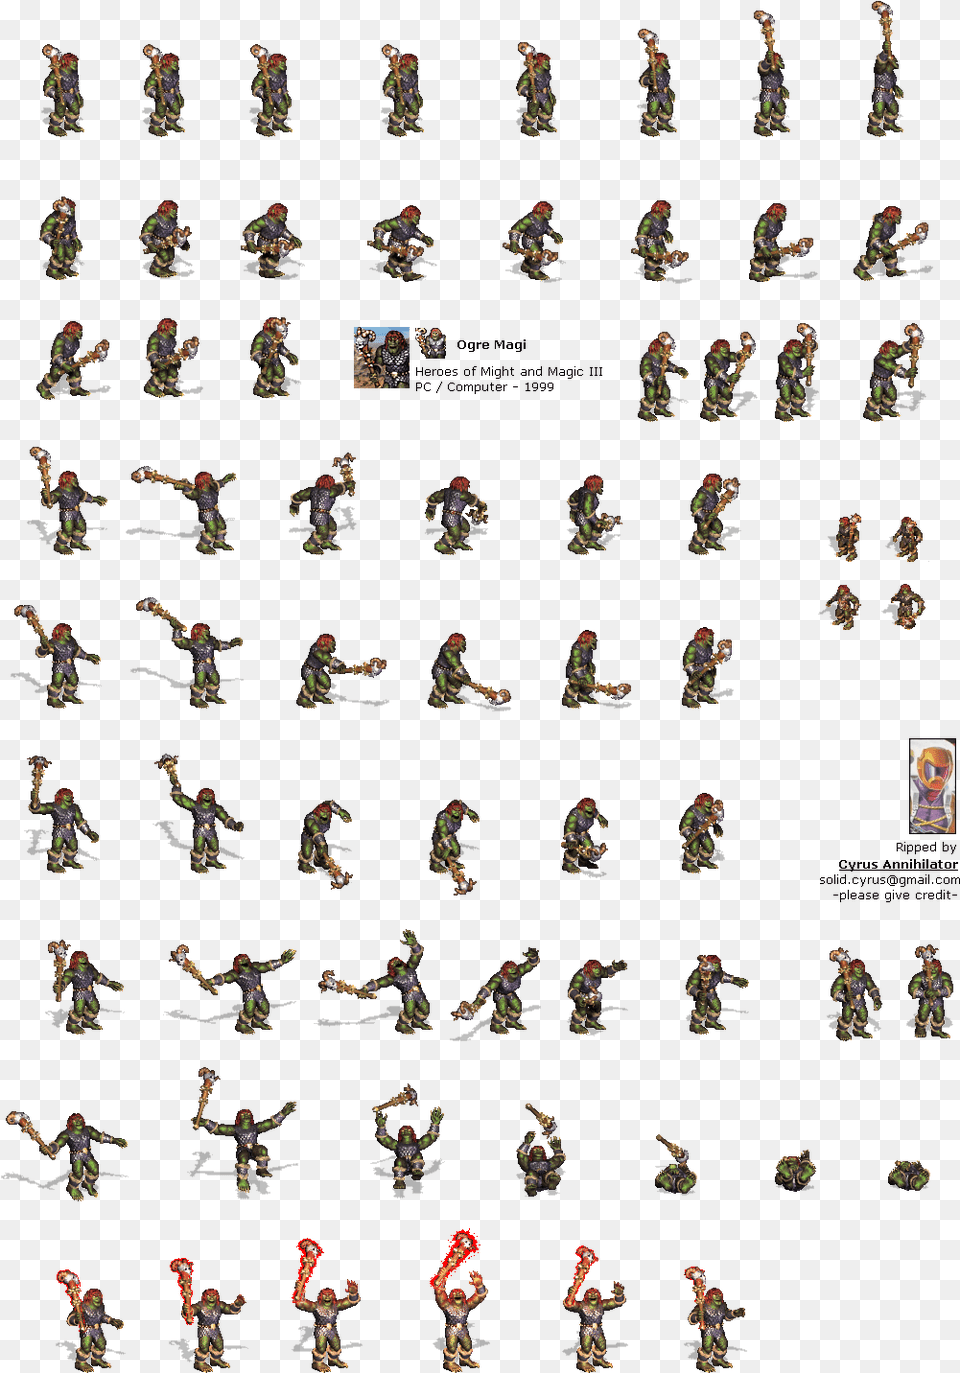 Click To View Full Size Ogre Magi Heroes, Person, Military, Military Uniform, People Png